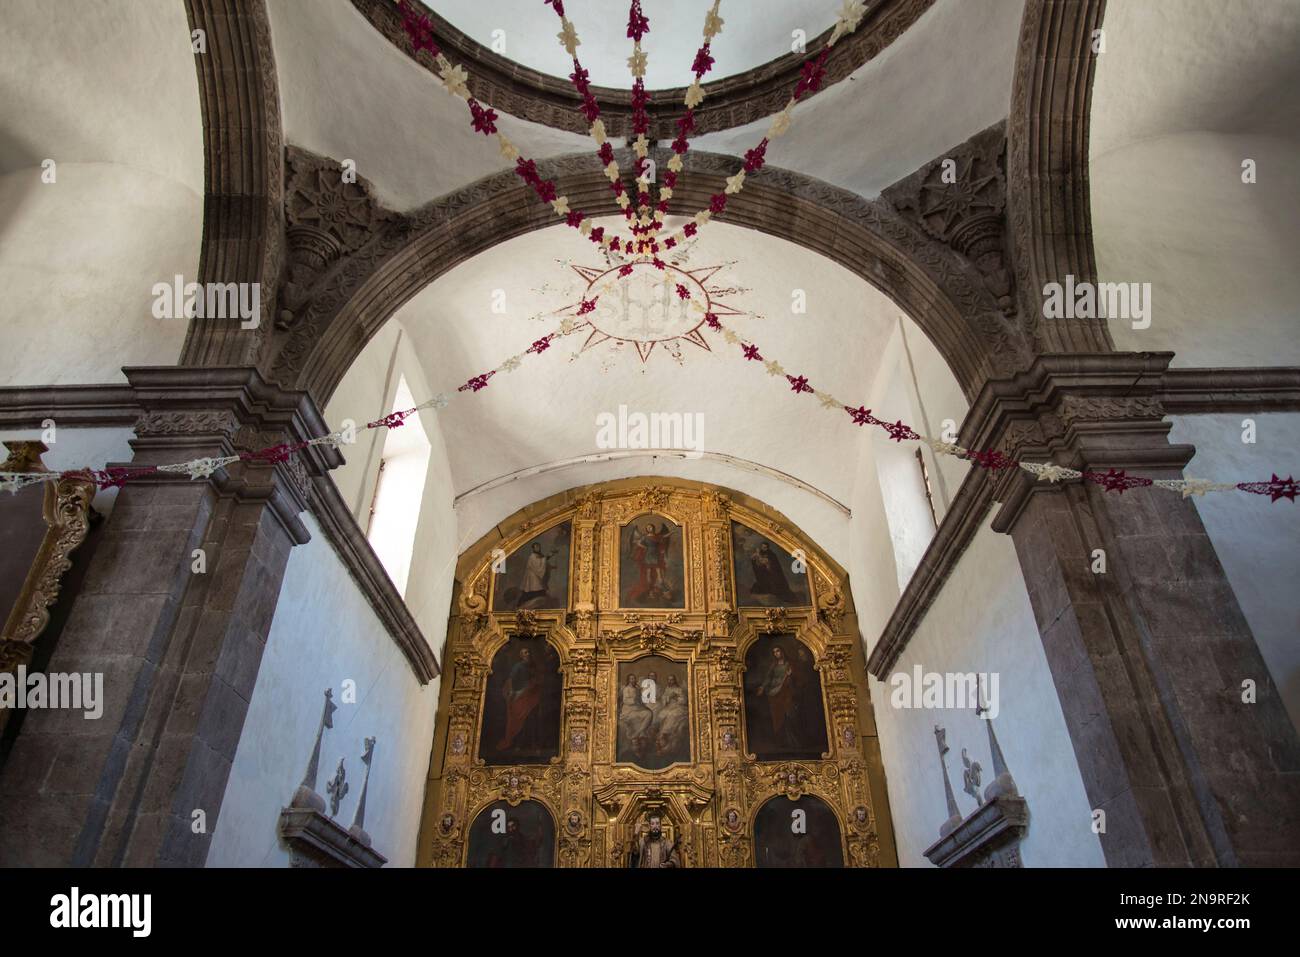 View of the altar and ceiling of San Javier Mission; San Javier Mission, Baja California Sur, Mexico Stock Photo